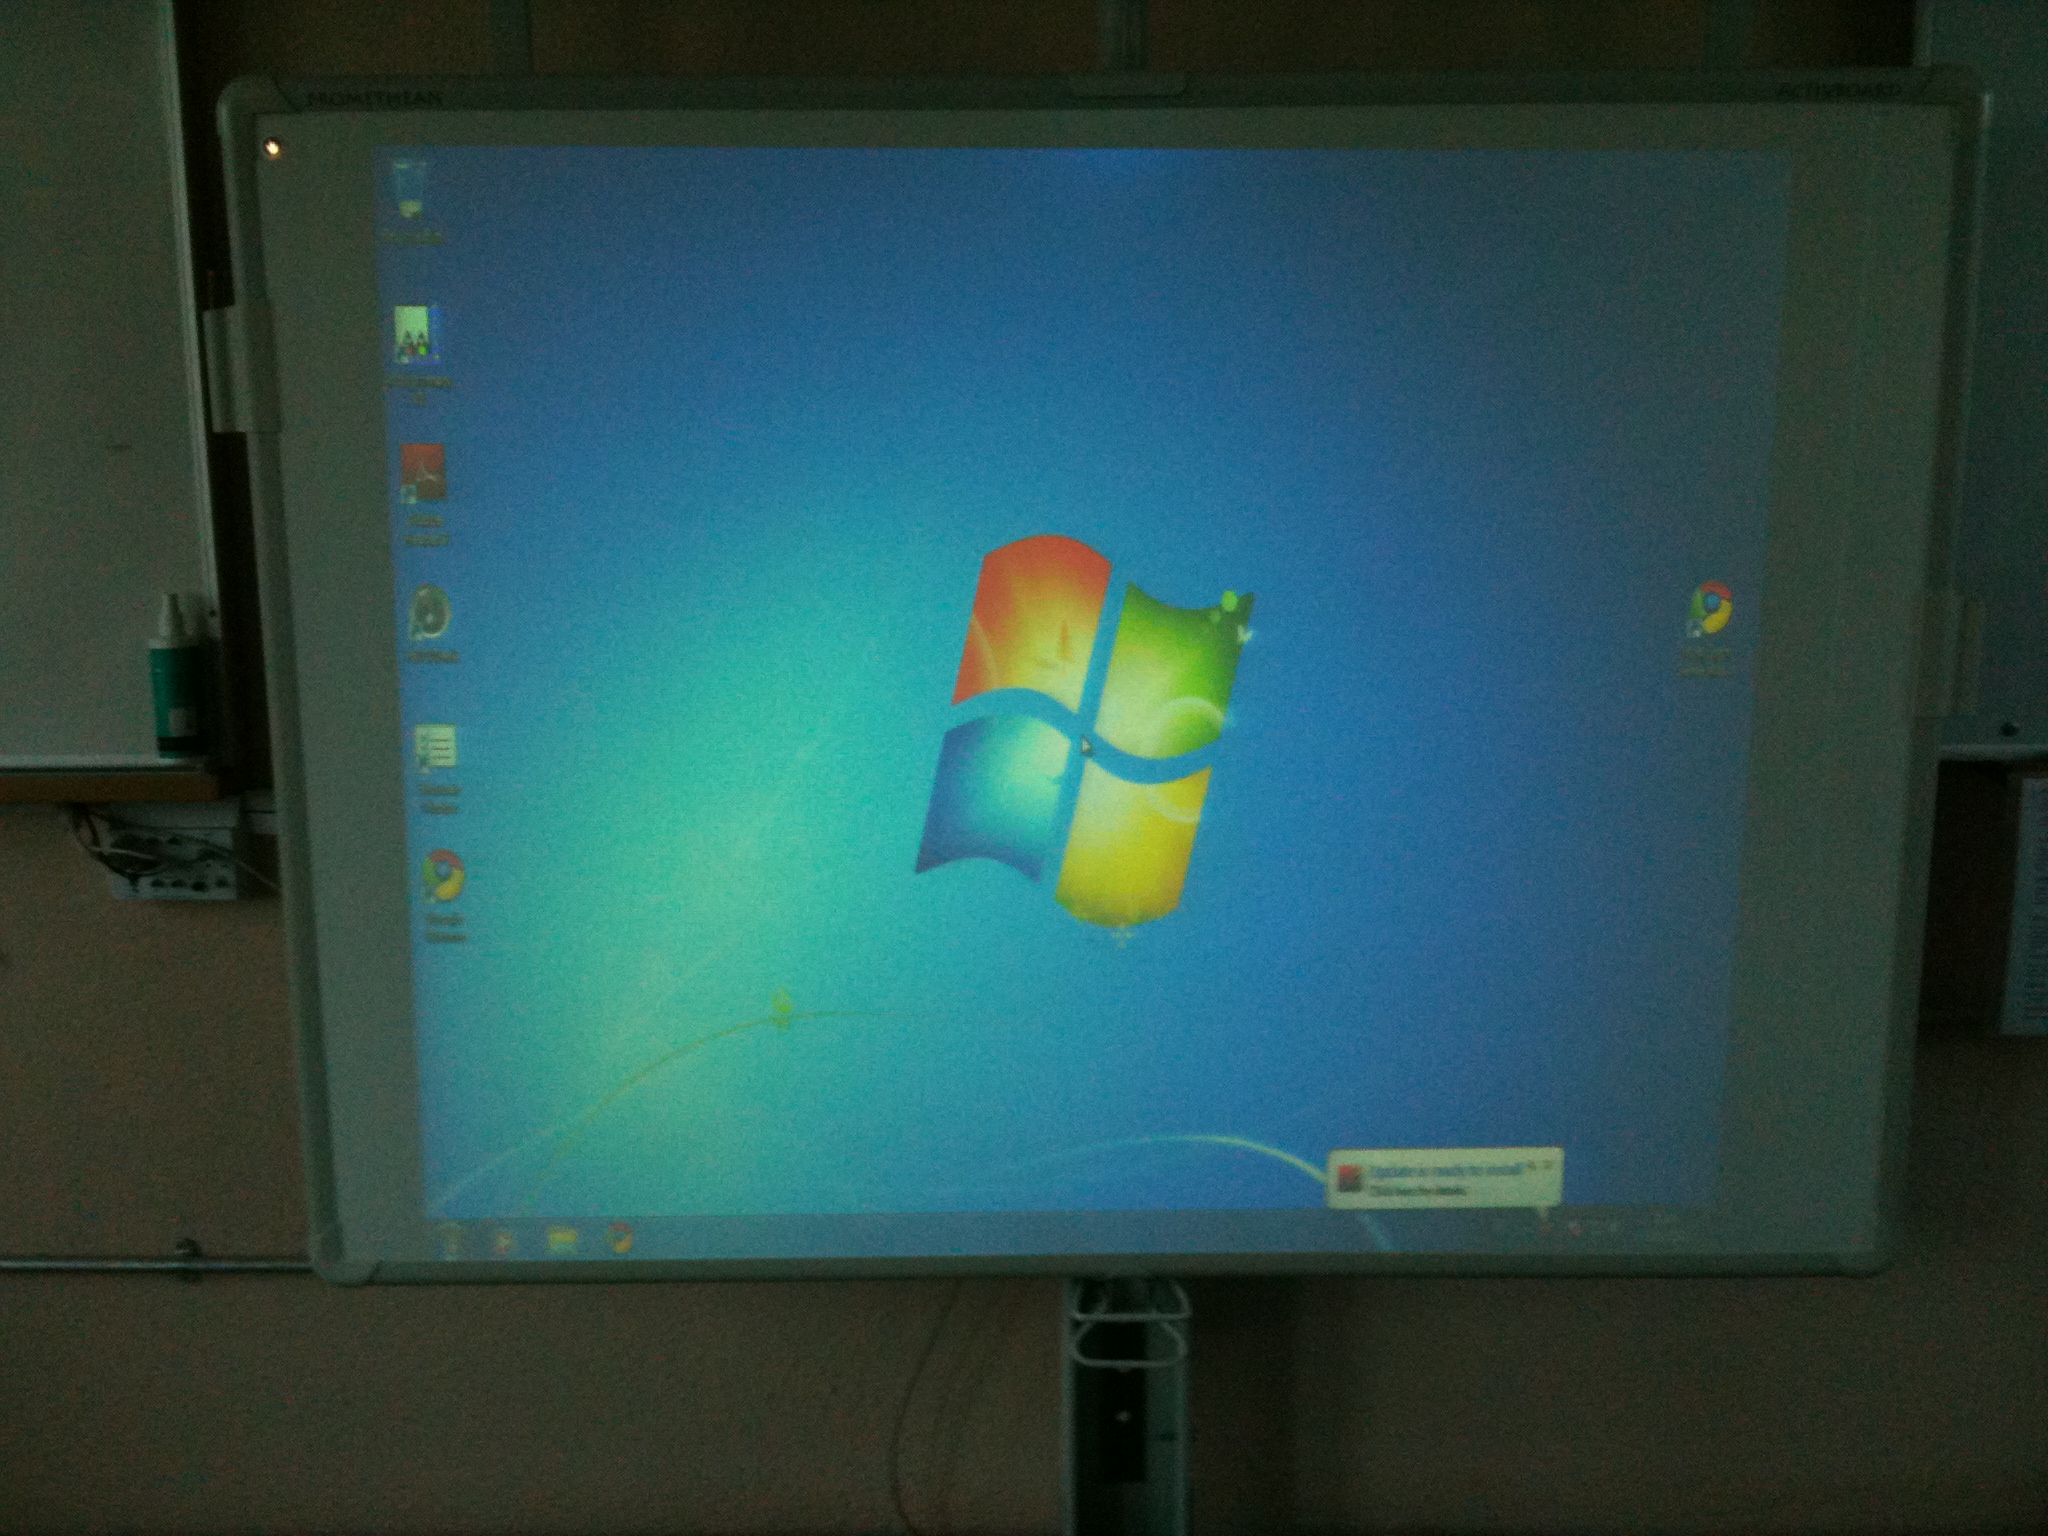 What will happen if I don’t service my Interactive Projector? | What